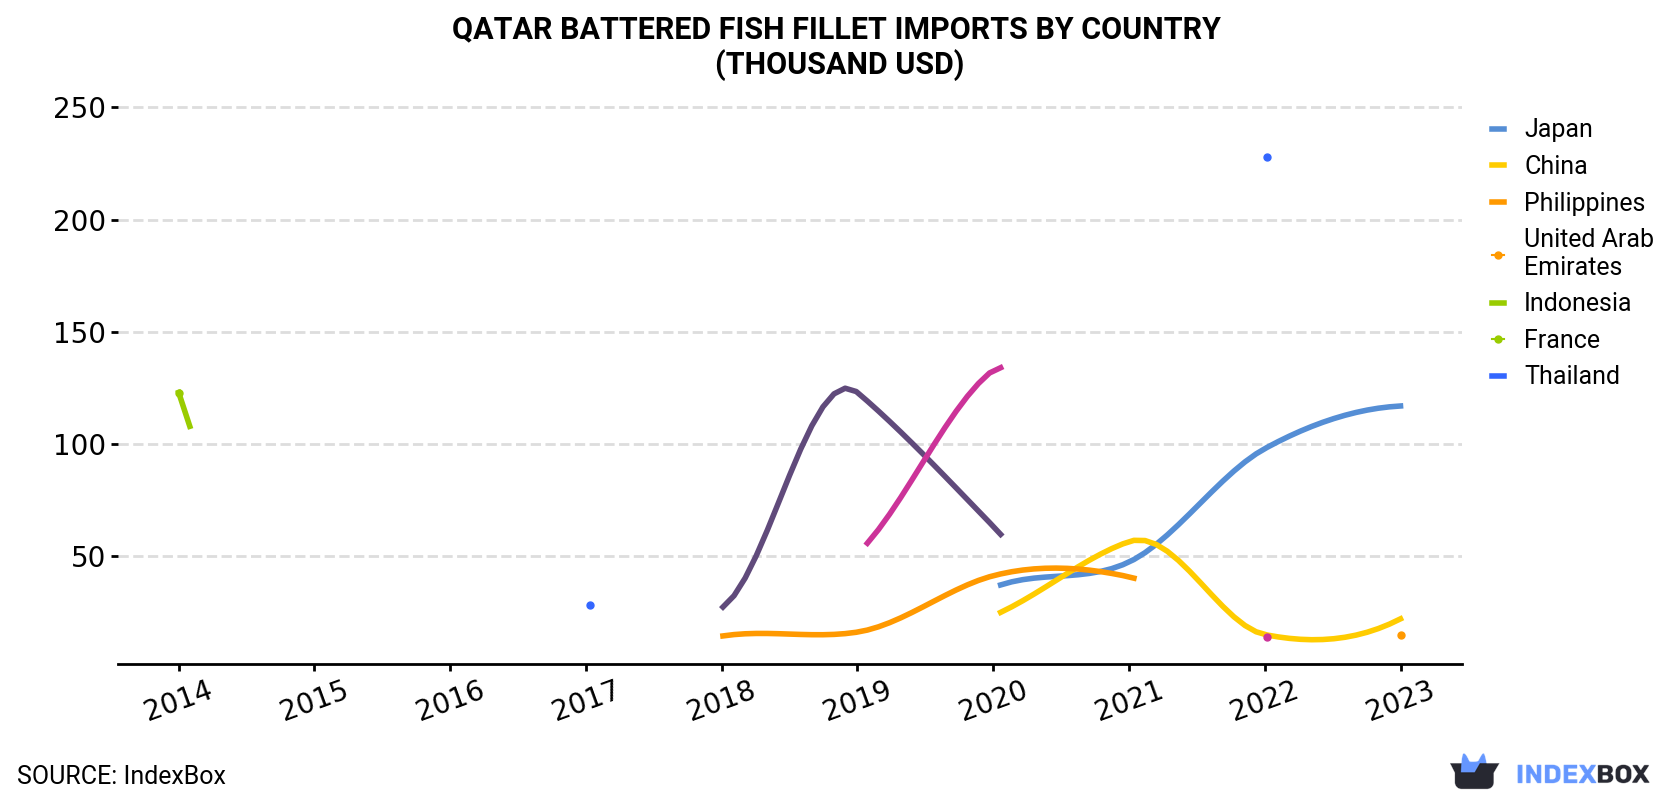 Qatar Battered Fish Fillet Imports By Country (Thousand USD)